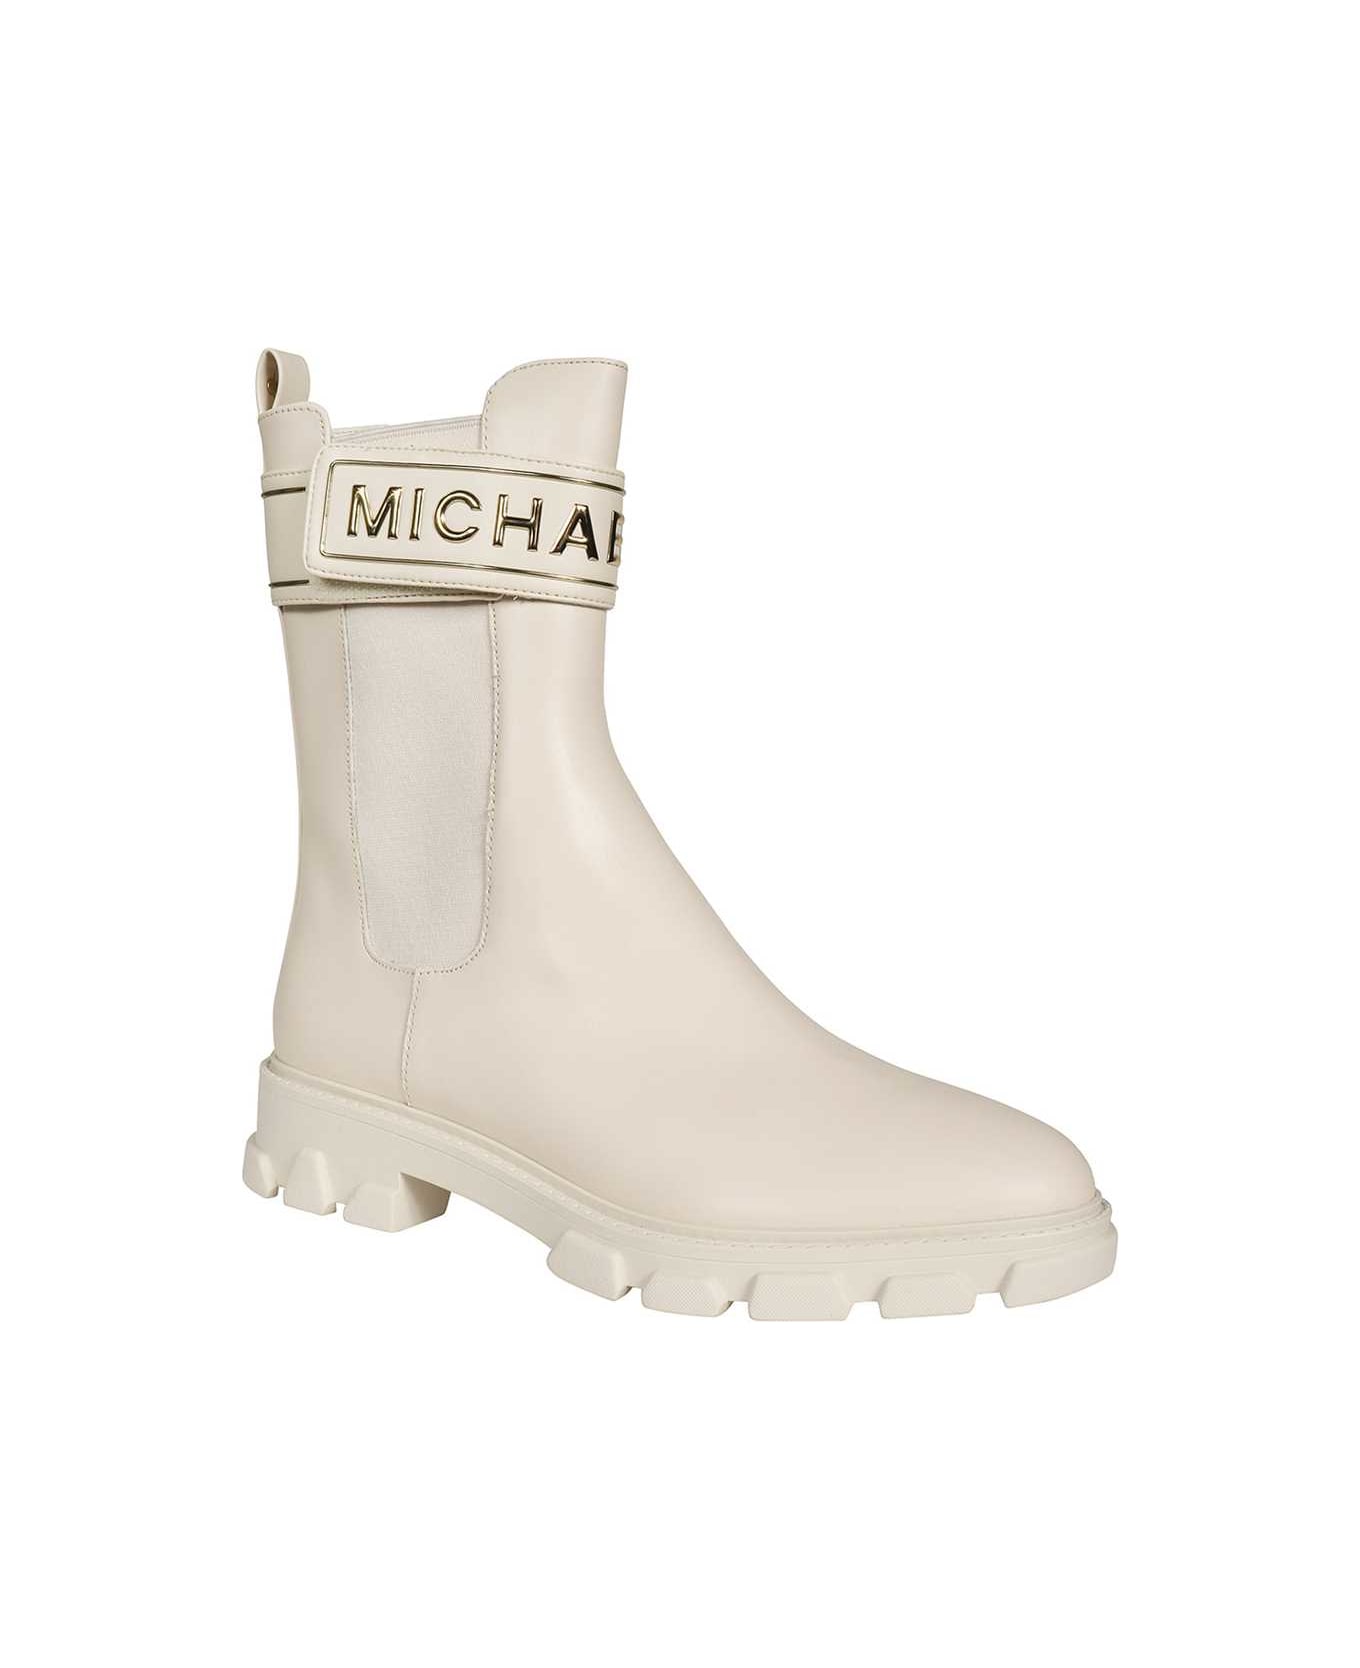 MICHAEL Michael Kors Leather Ankle Boots - White